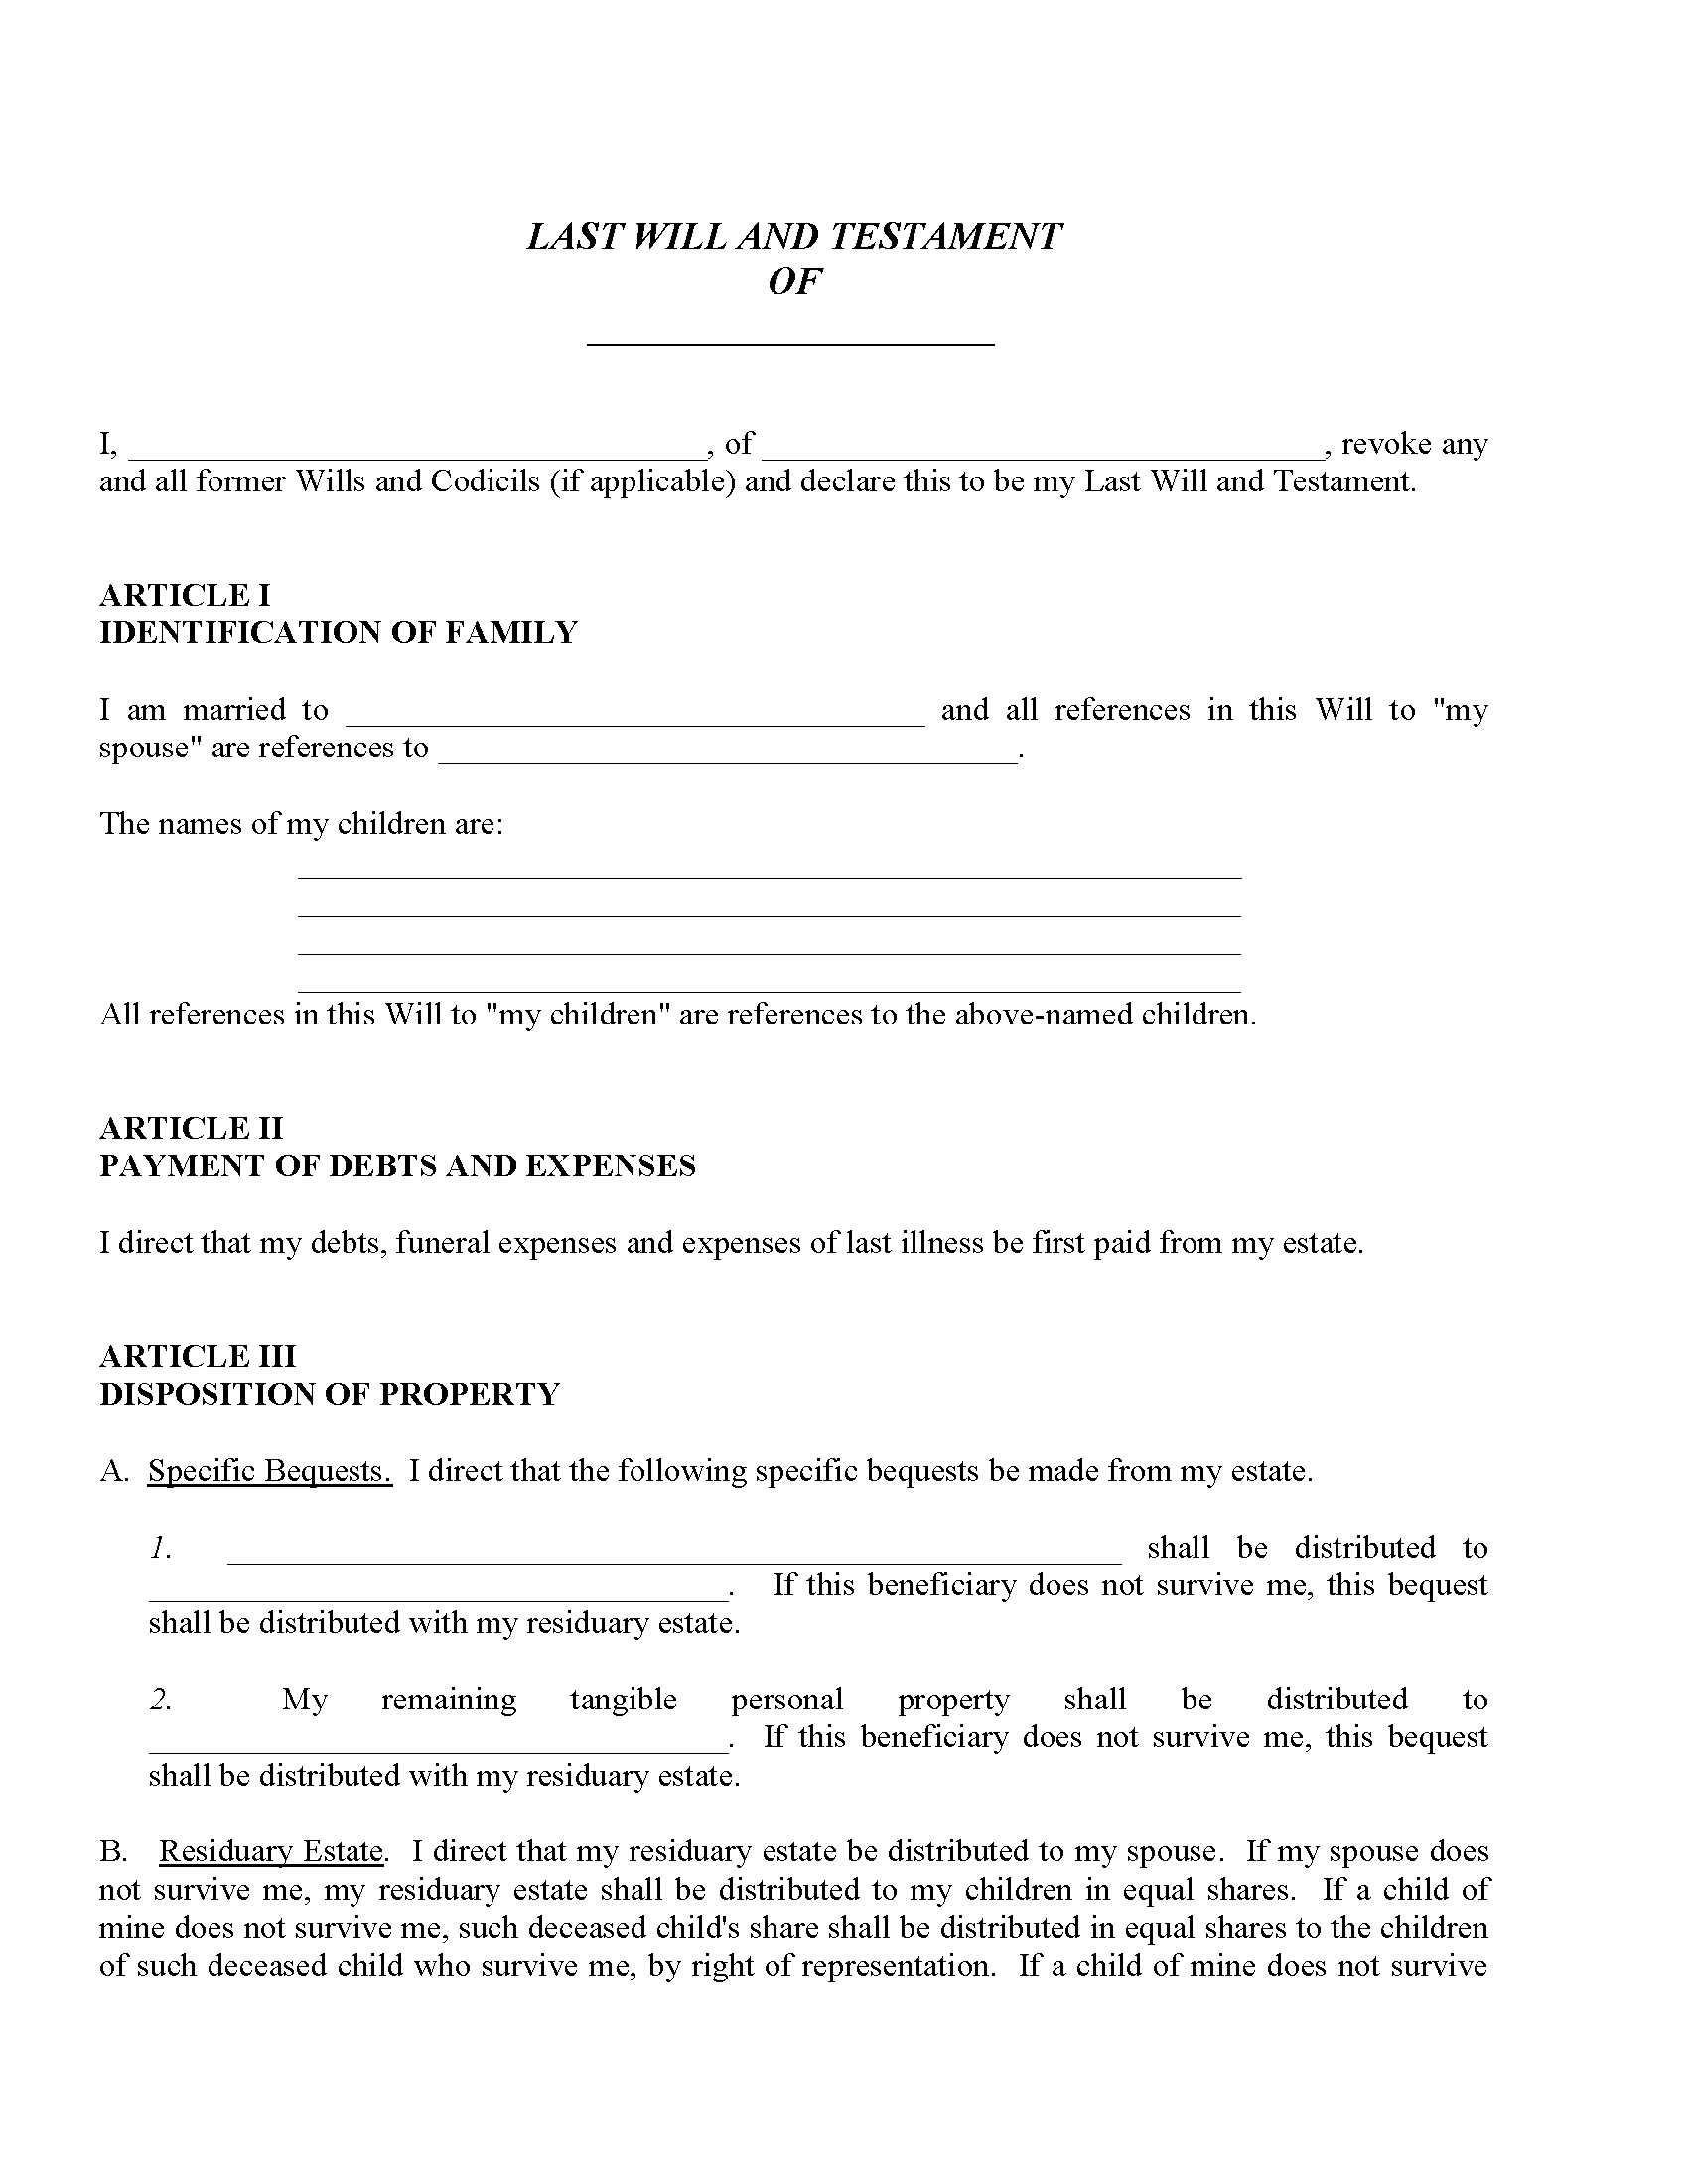 North Carolina Last Will and Testament Free Printable Legal Forms